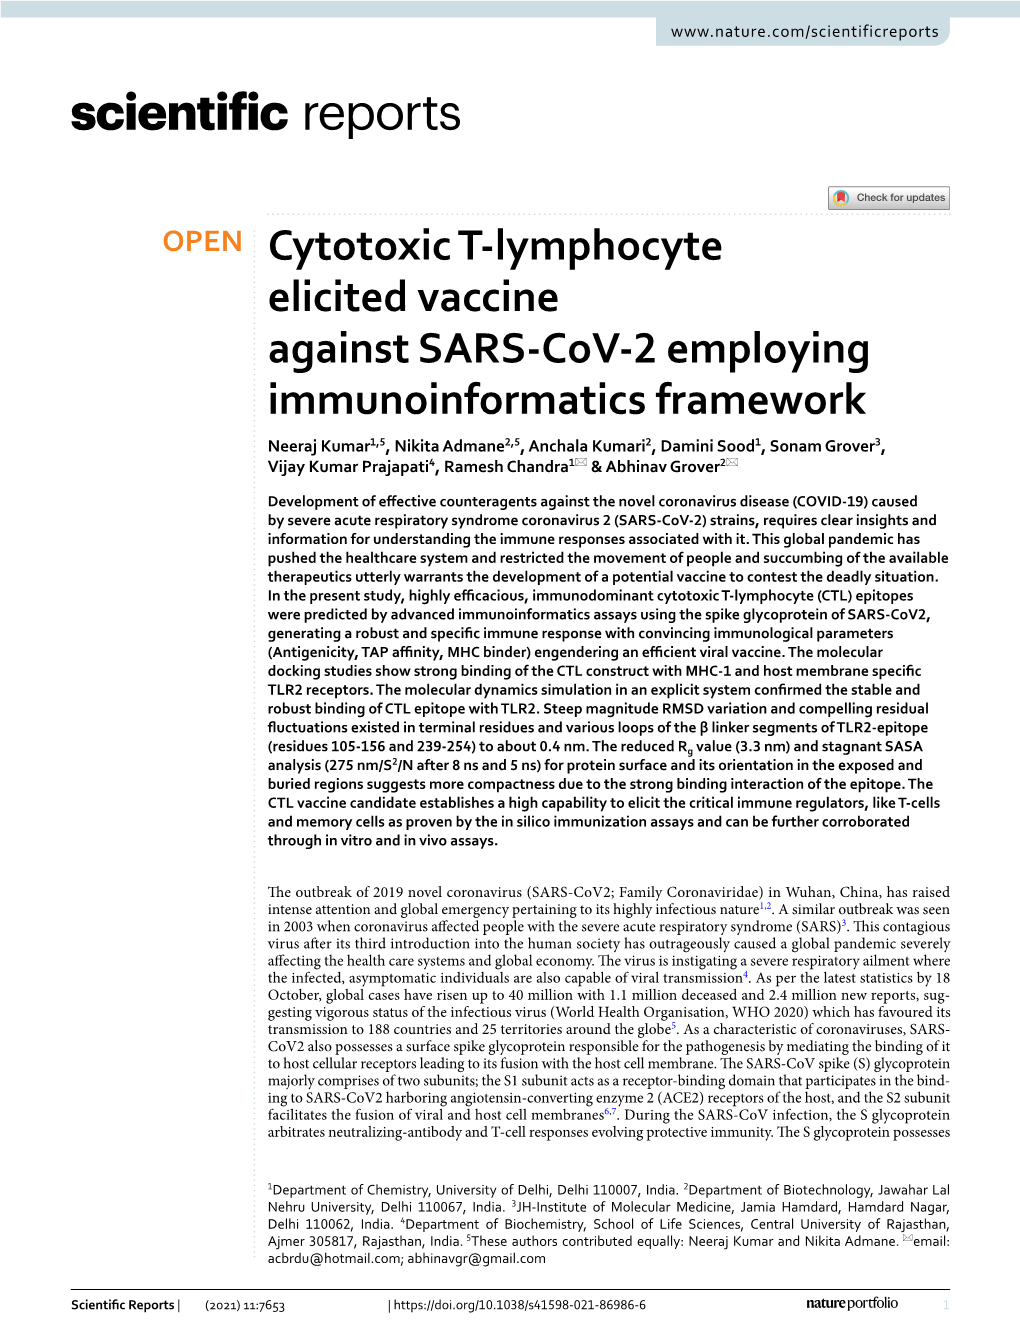 Cytotoxic T-Lymphocyte Elicited Vaccine Against SARS-Cov-2